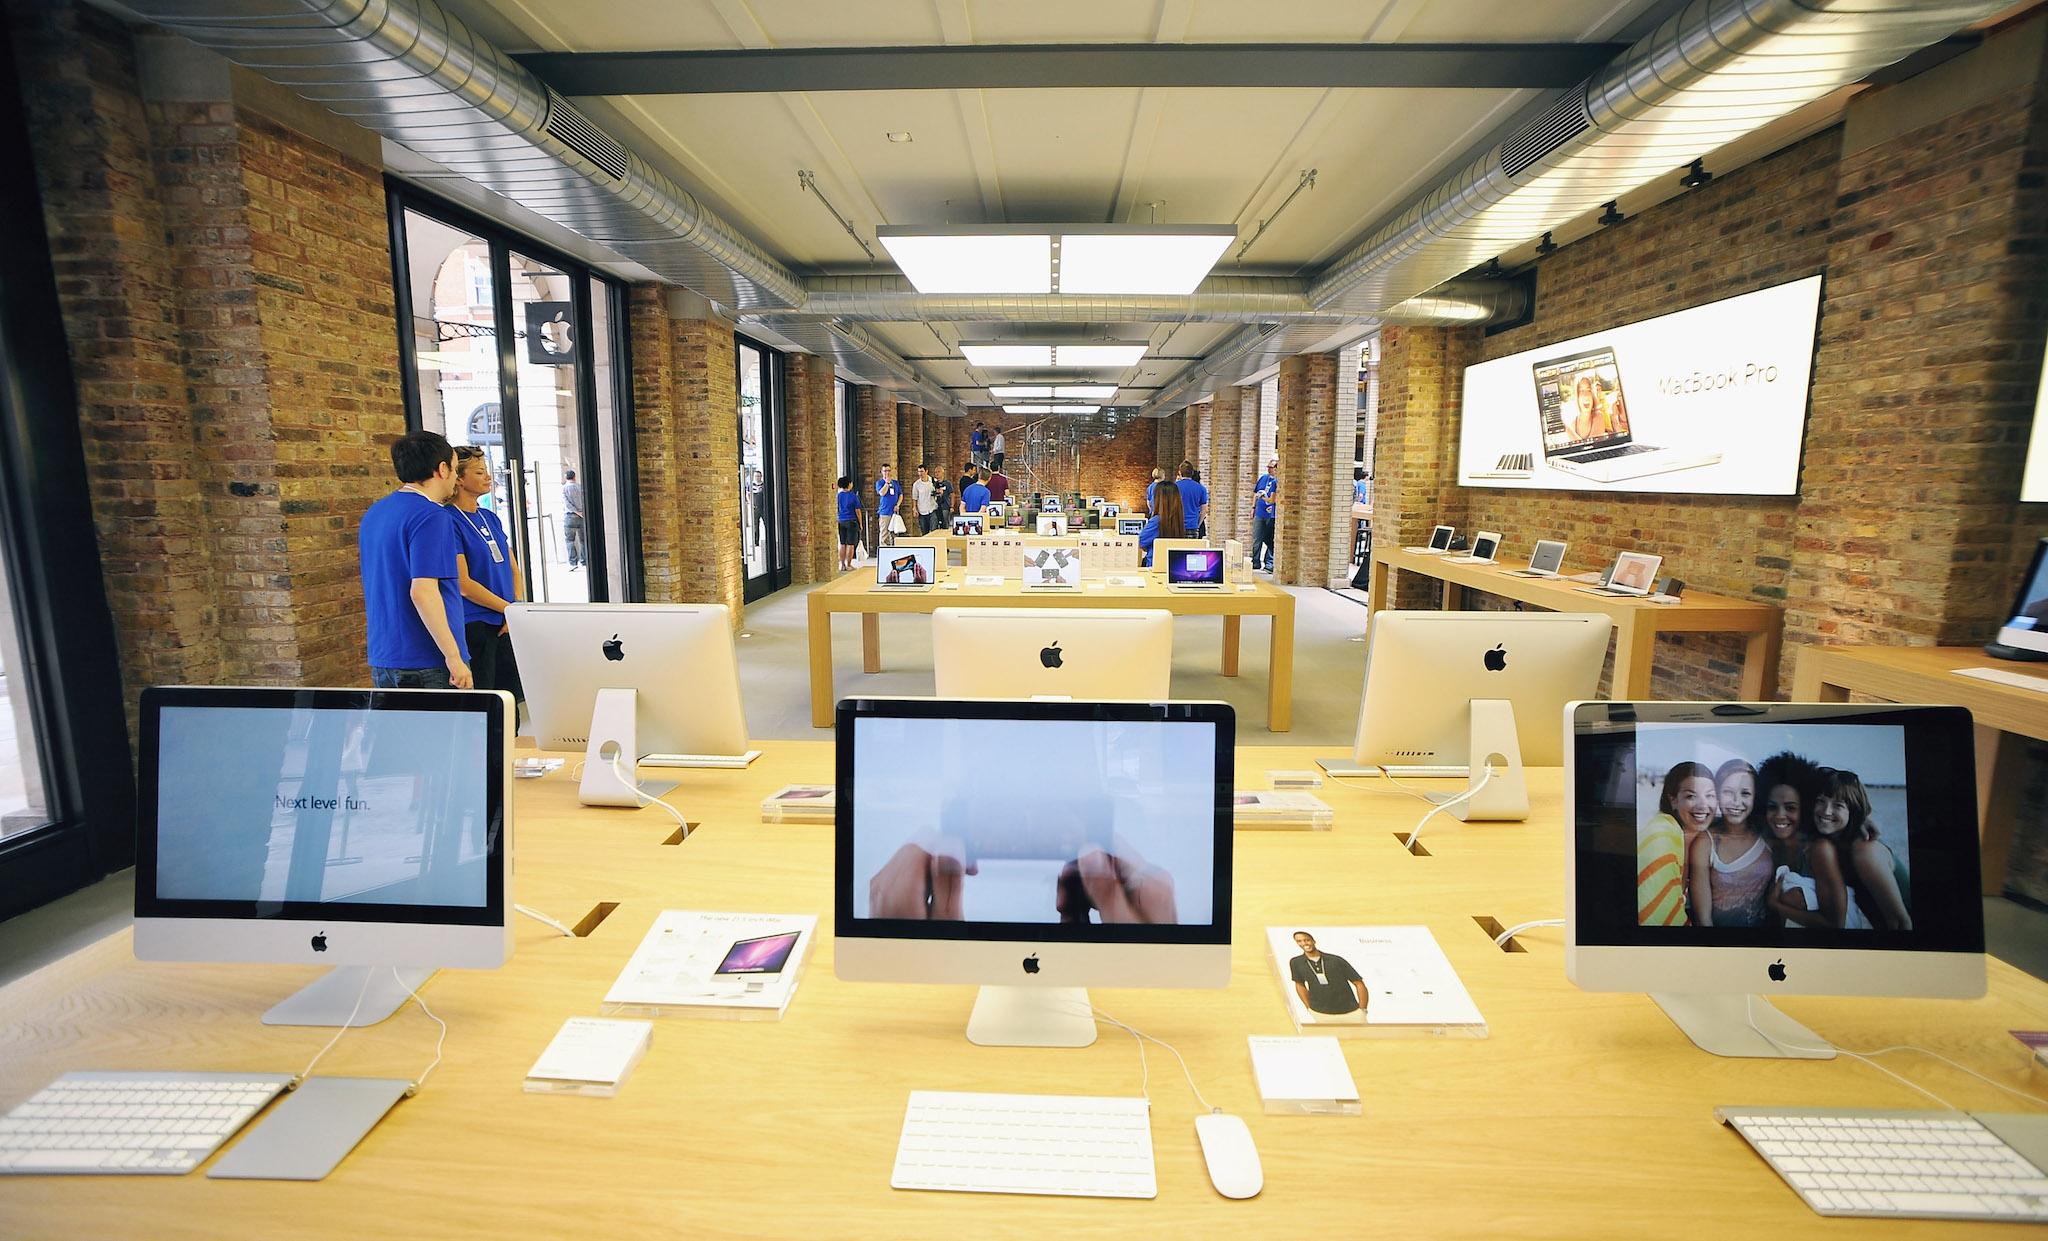 Tables of Apple Mac products on display in the new Apple Store In Covent Garden on August 5, 2010 in London, England